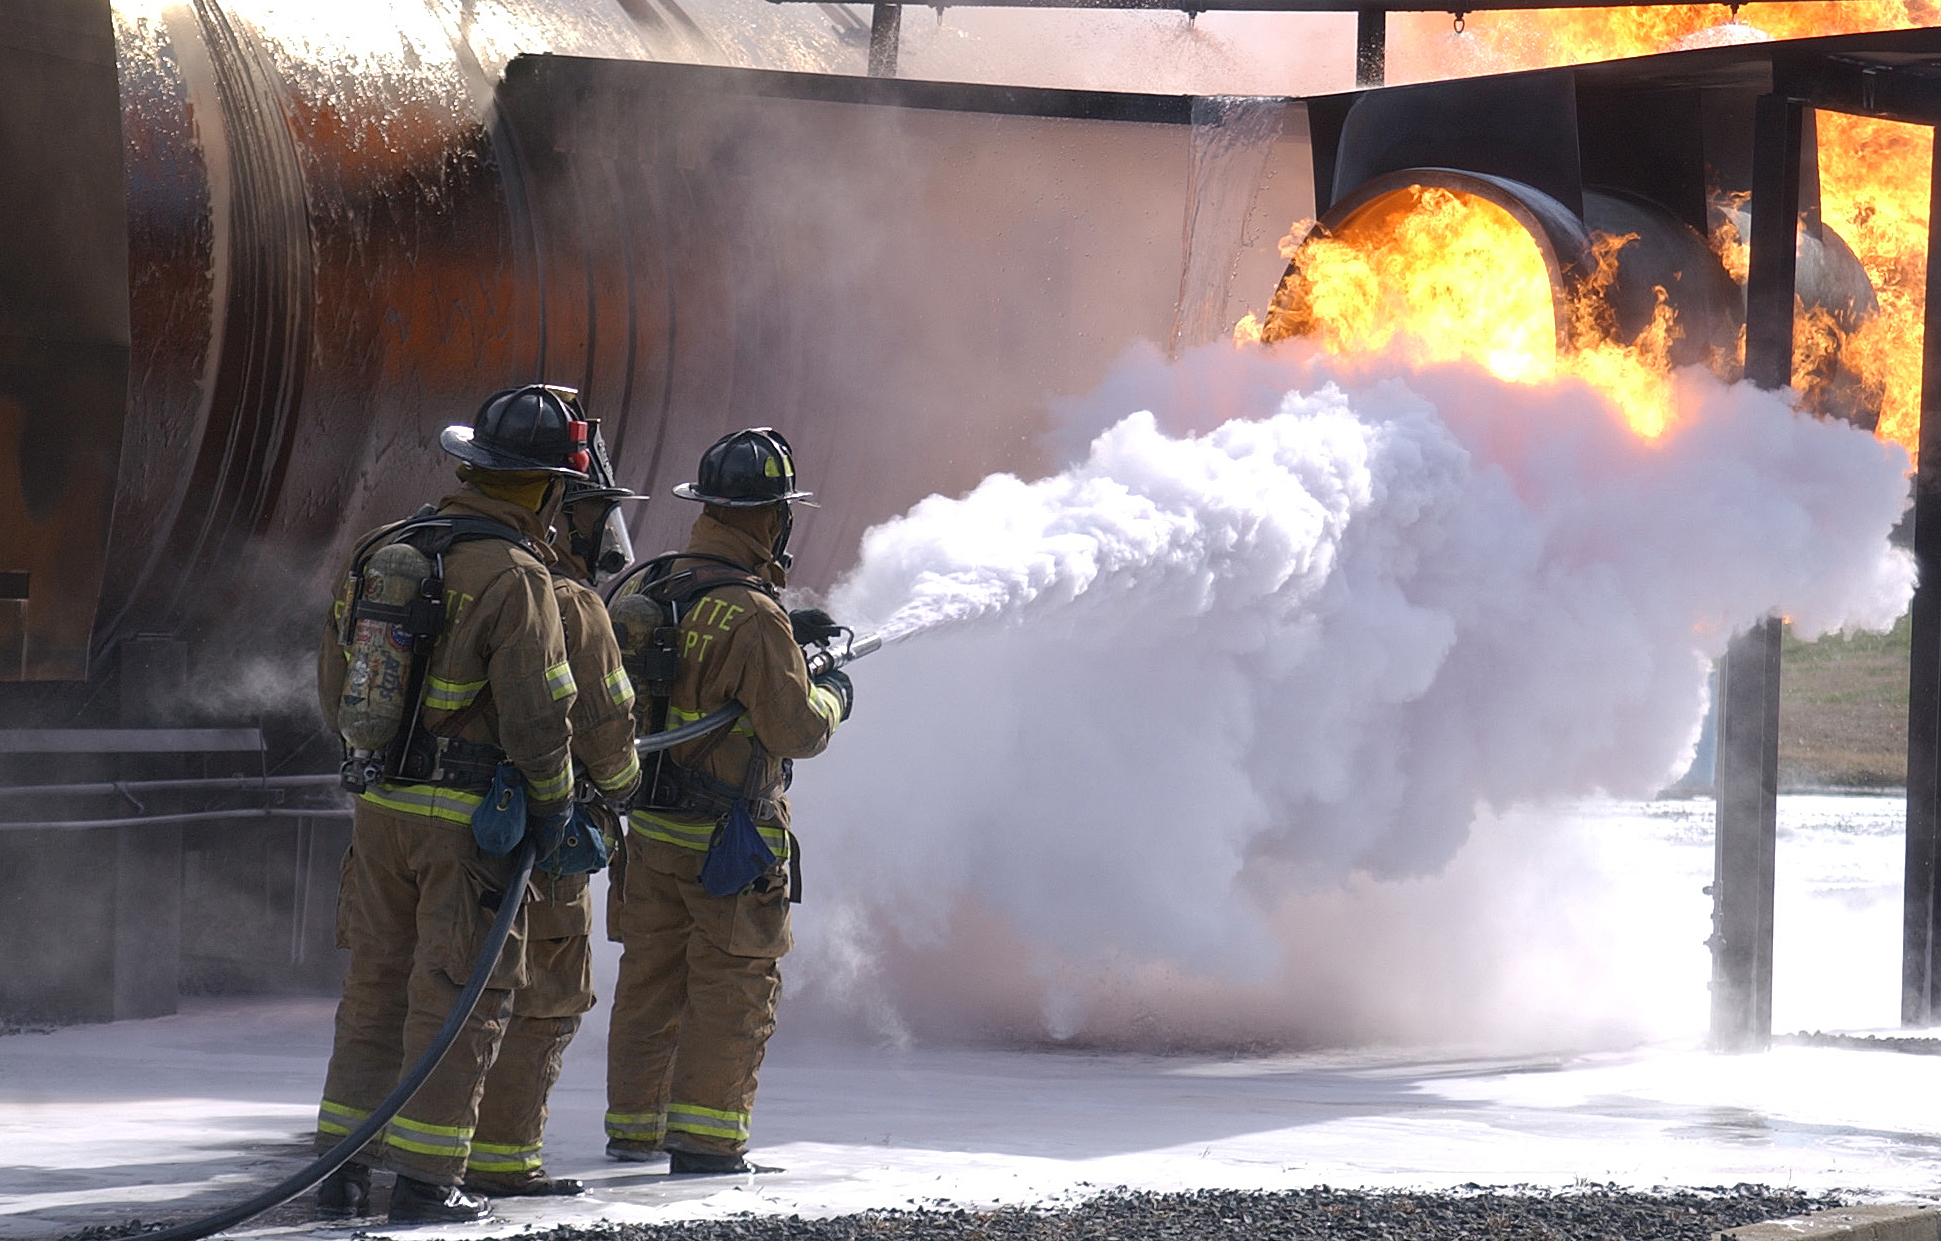 Certain firefighting foams used to put out oil fires have been linked to PFAS contamination of groundwater near fire stations and military bases. Photo by Tech Sgt Brian E. Christiansen, North Carolina Air National Guard Public Affairs